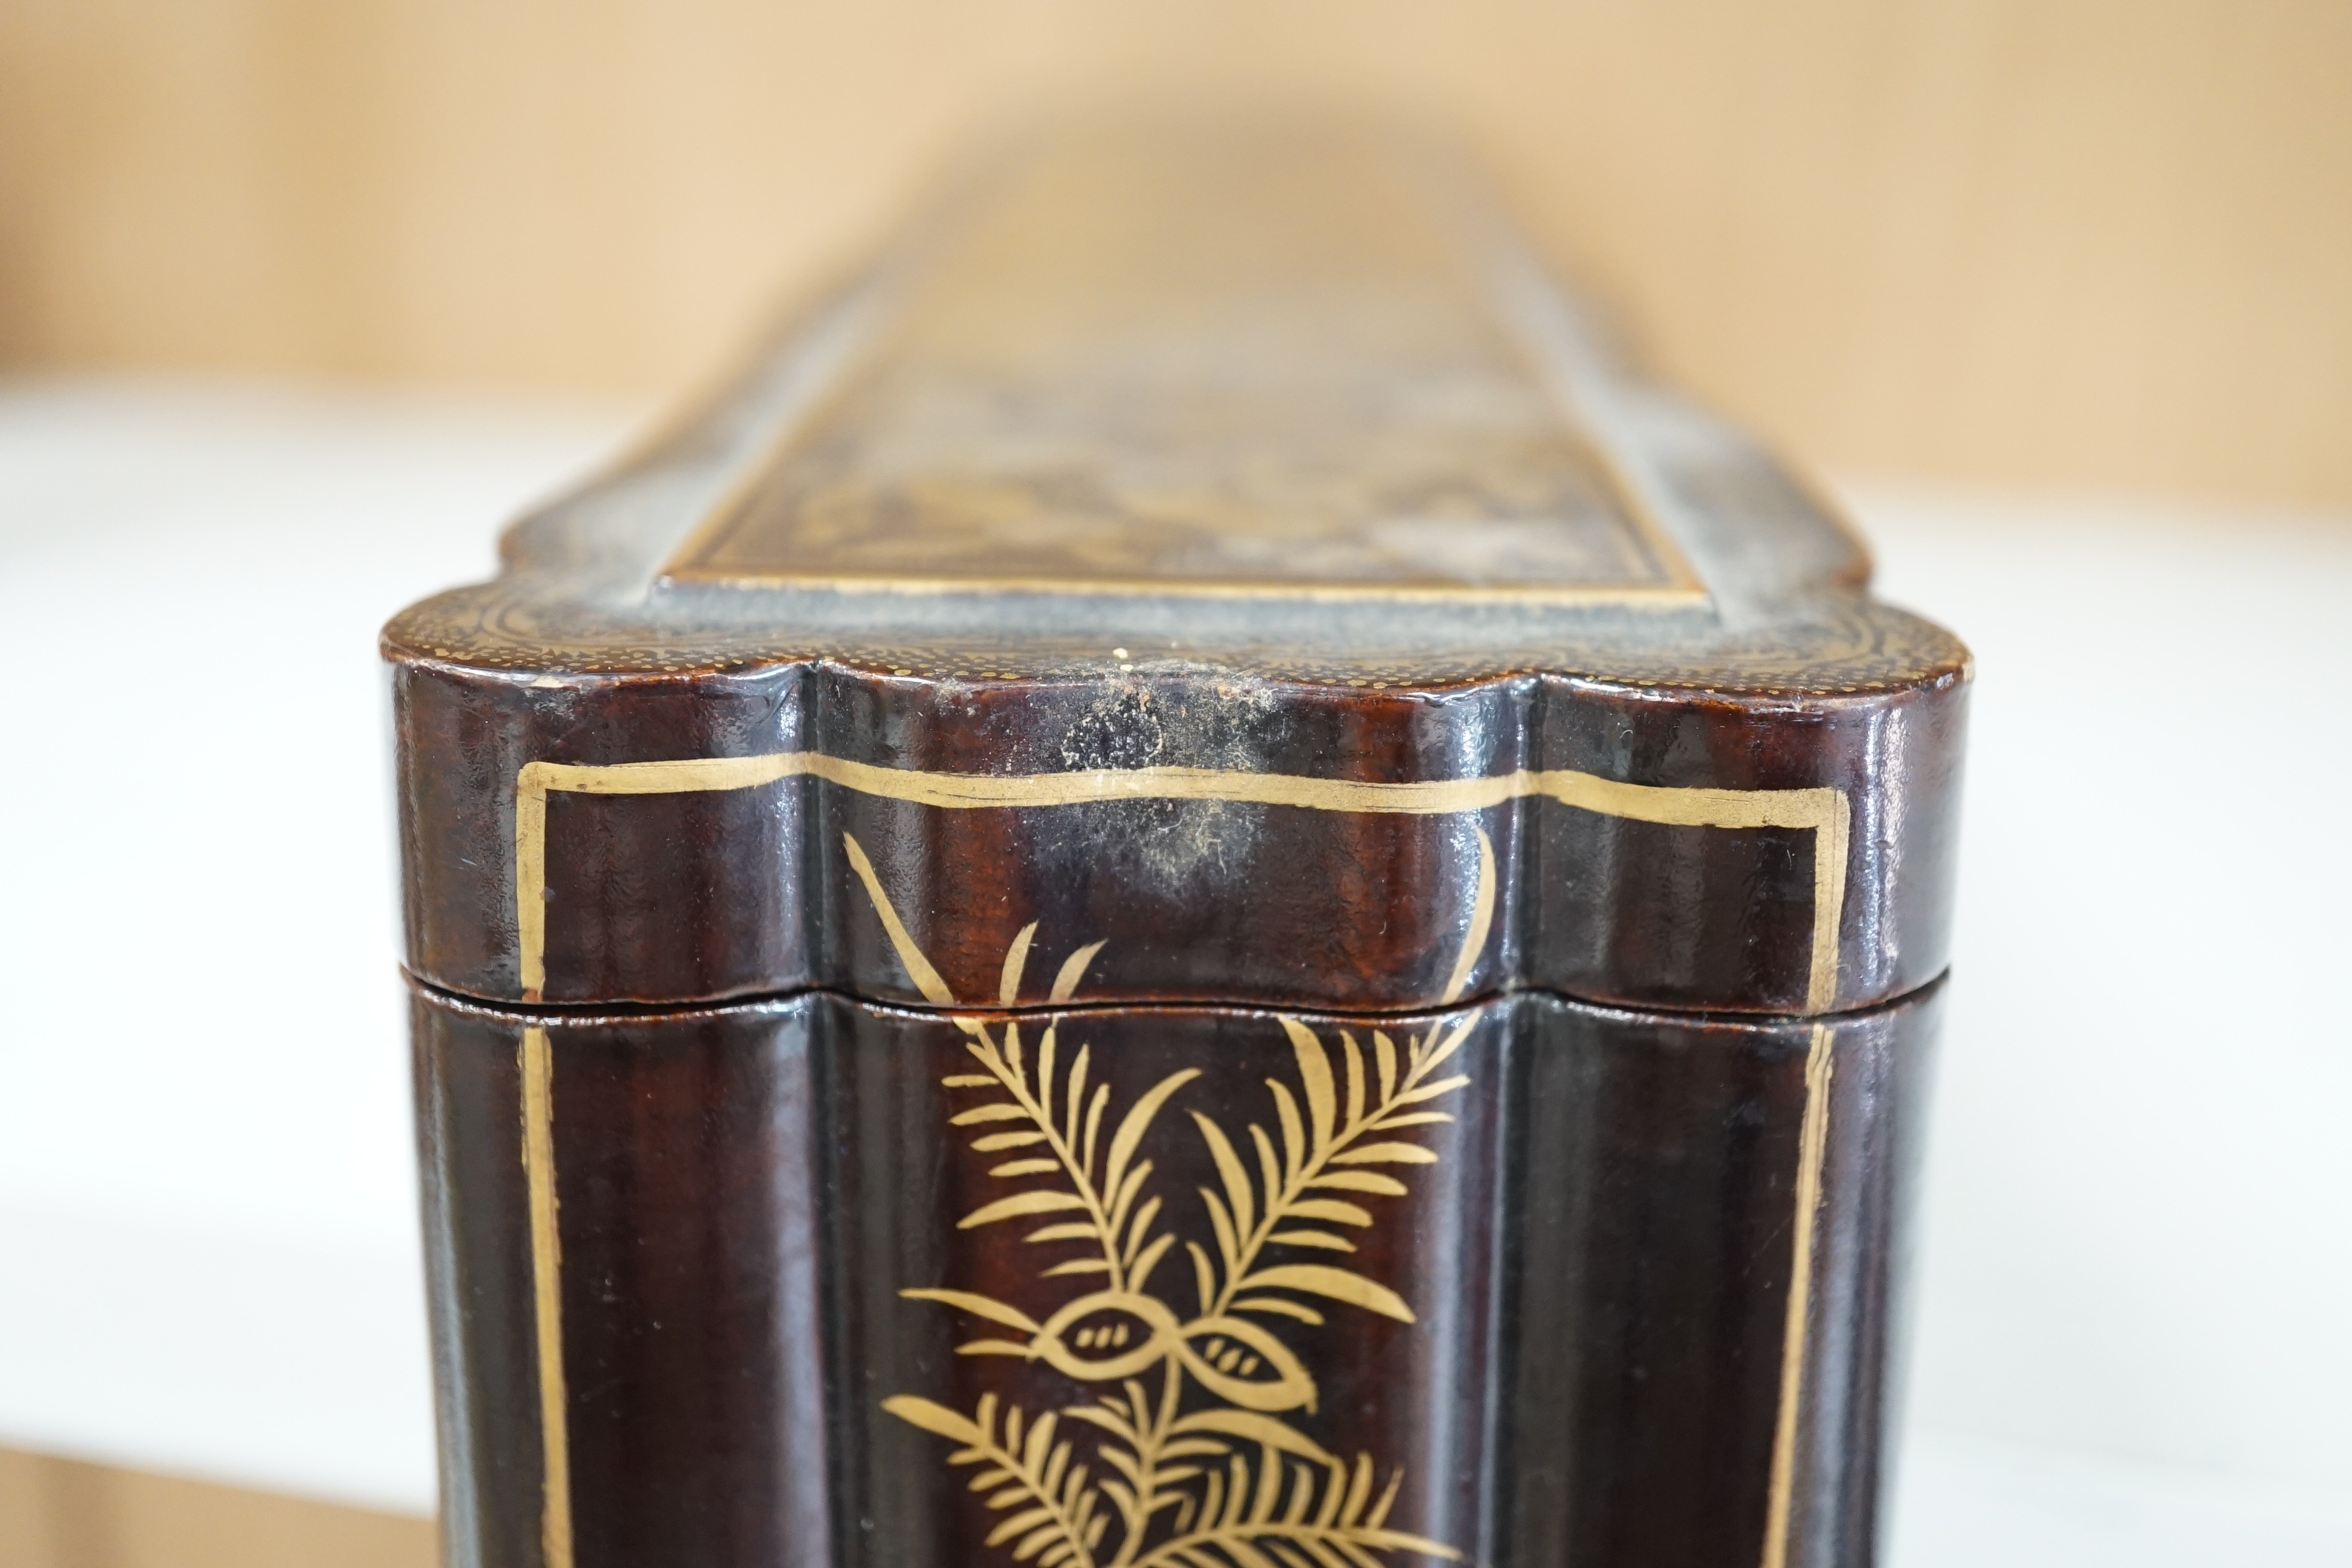 A 19th century Chinese export lacquer fan case, 40.5cm